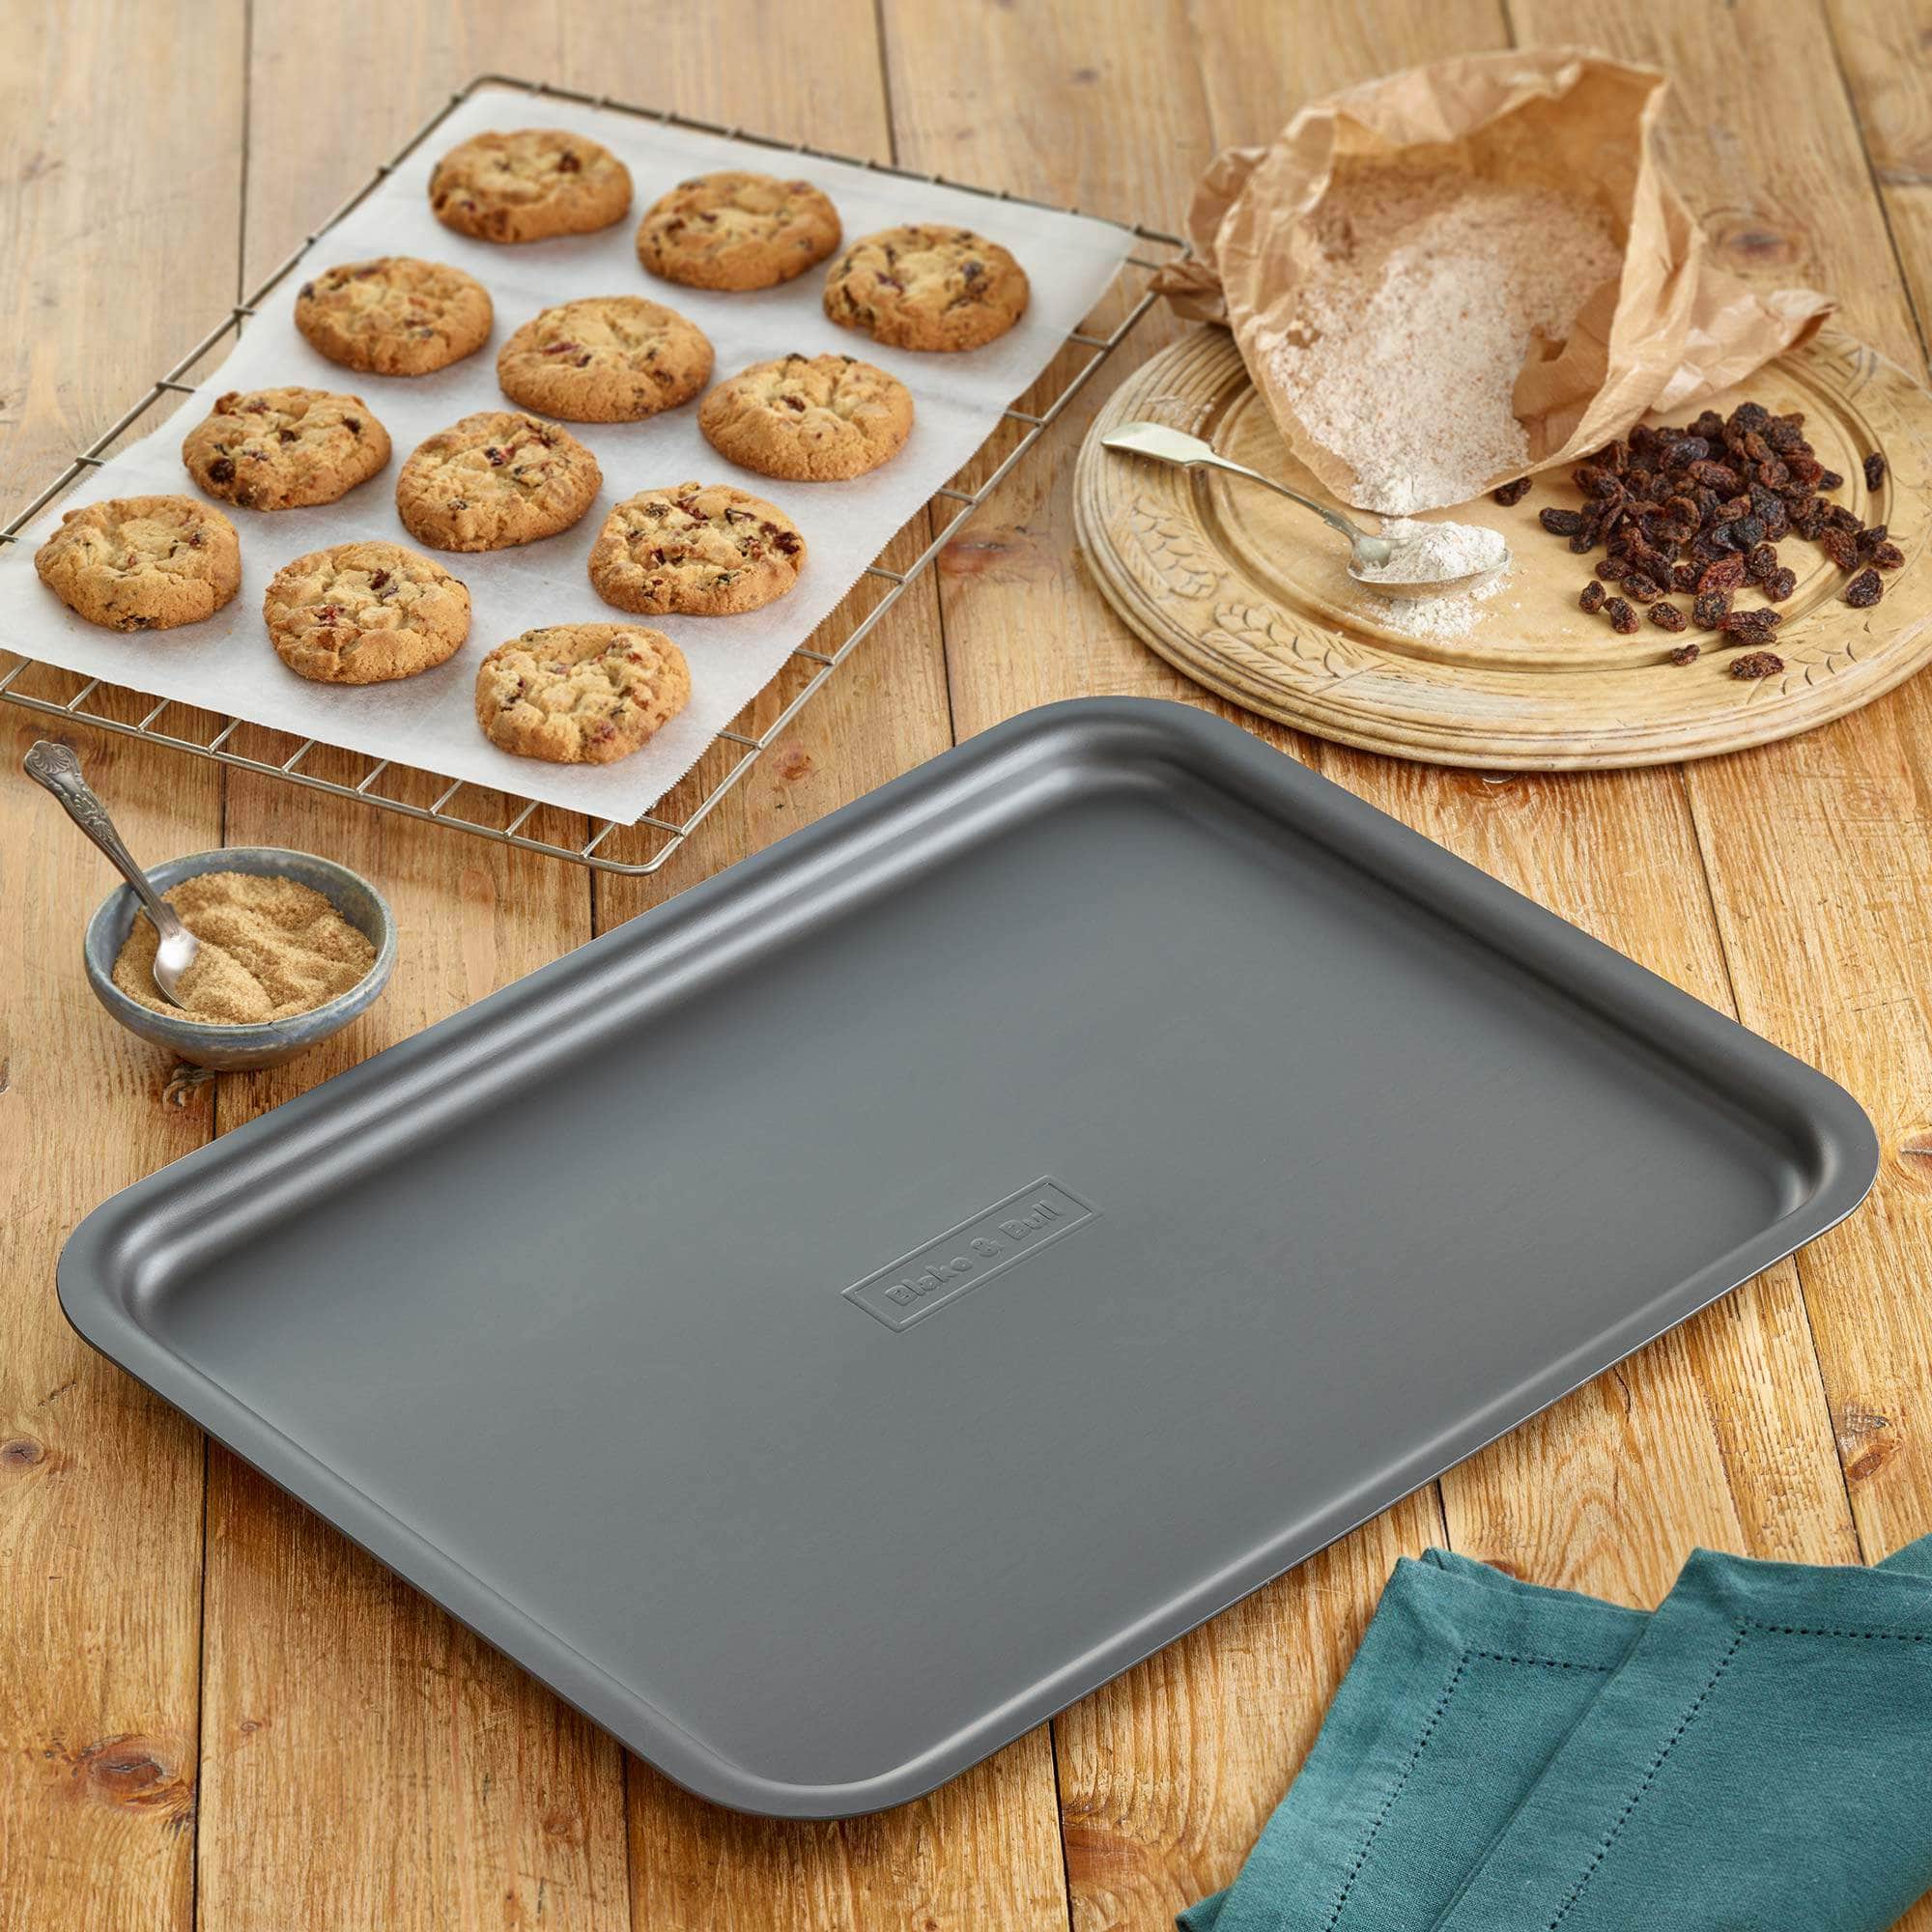 'Fits on runners' baking tray for use with Aga range cookers 'full oven' size